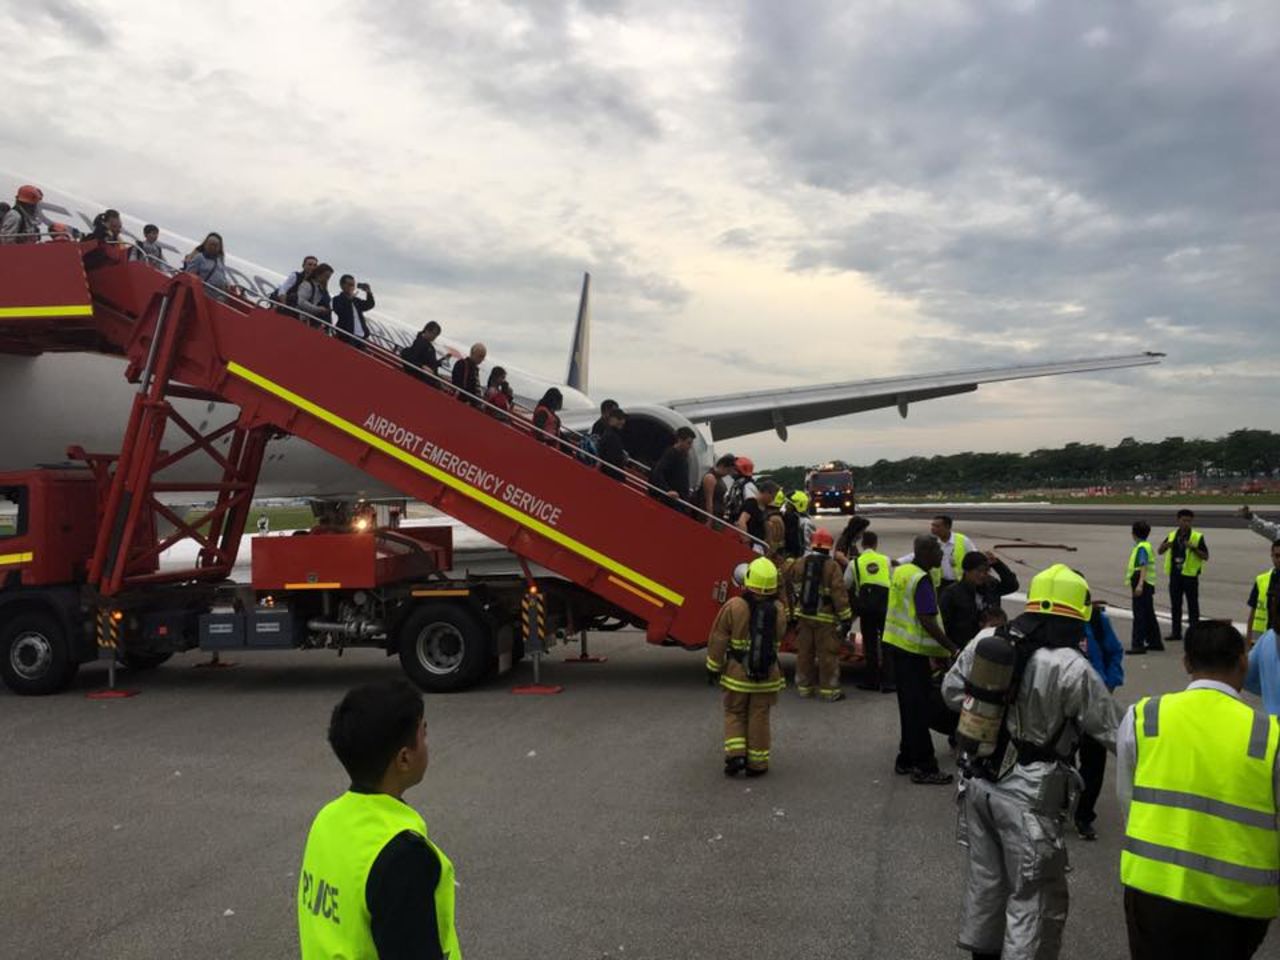 All passengers were safely evacuated after the blaze.